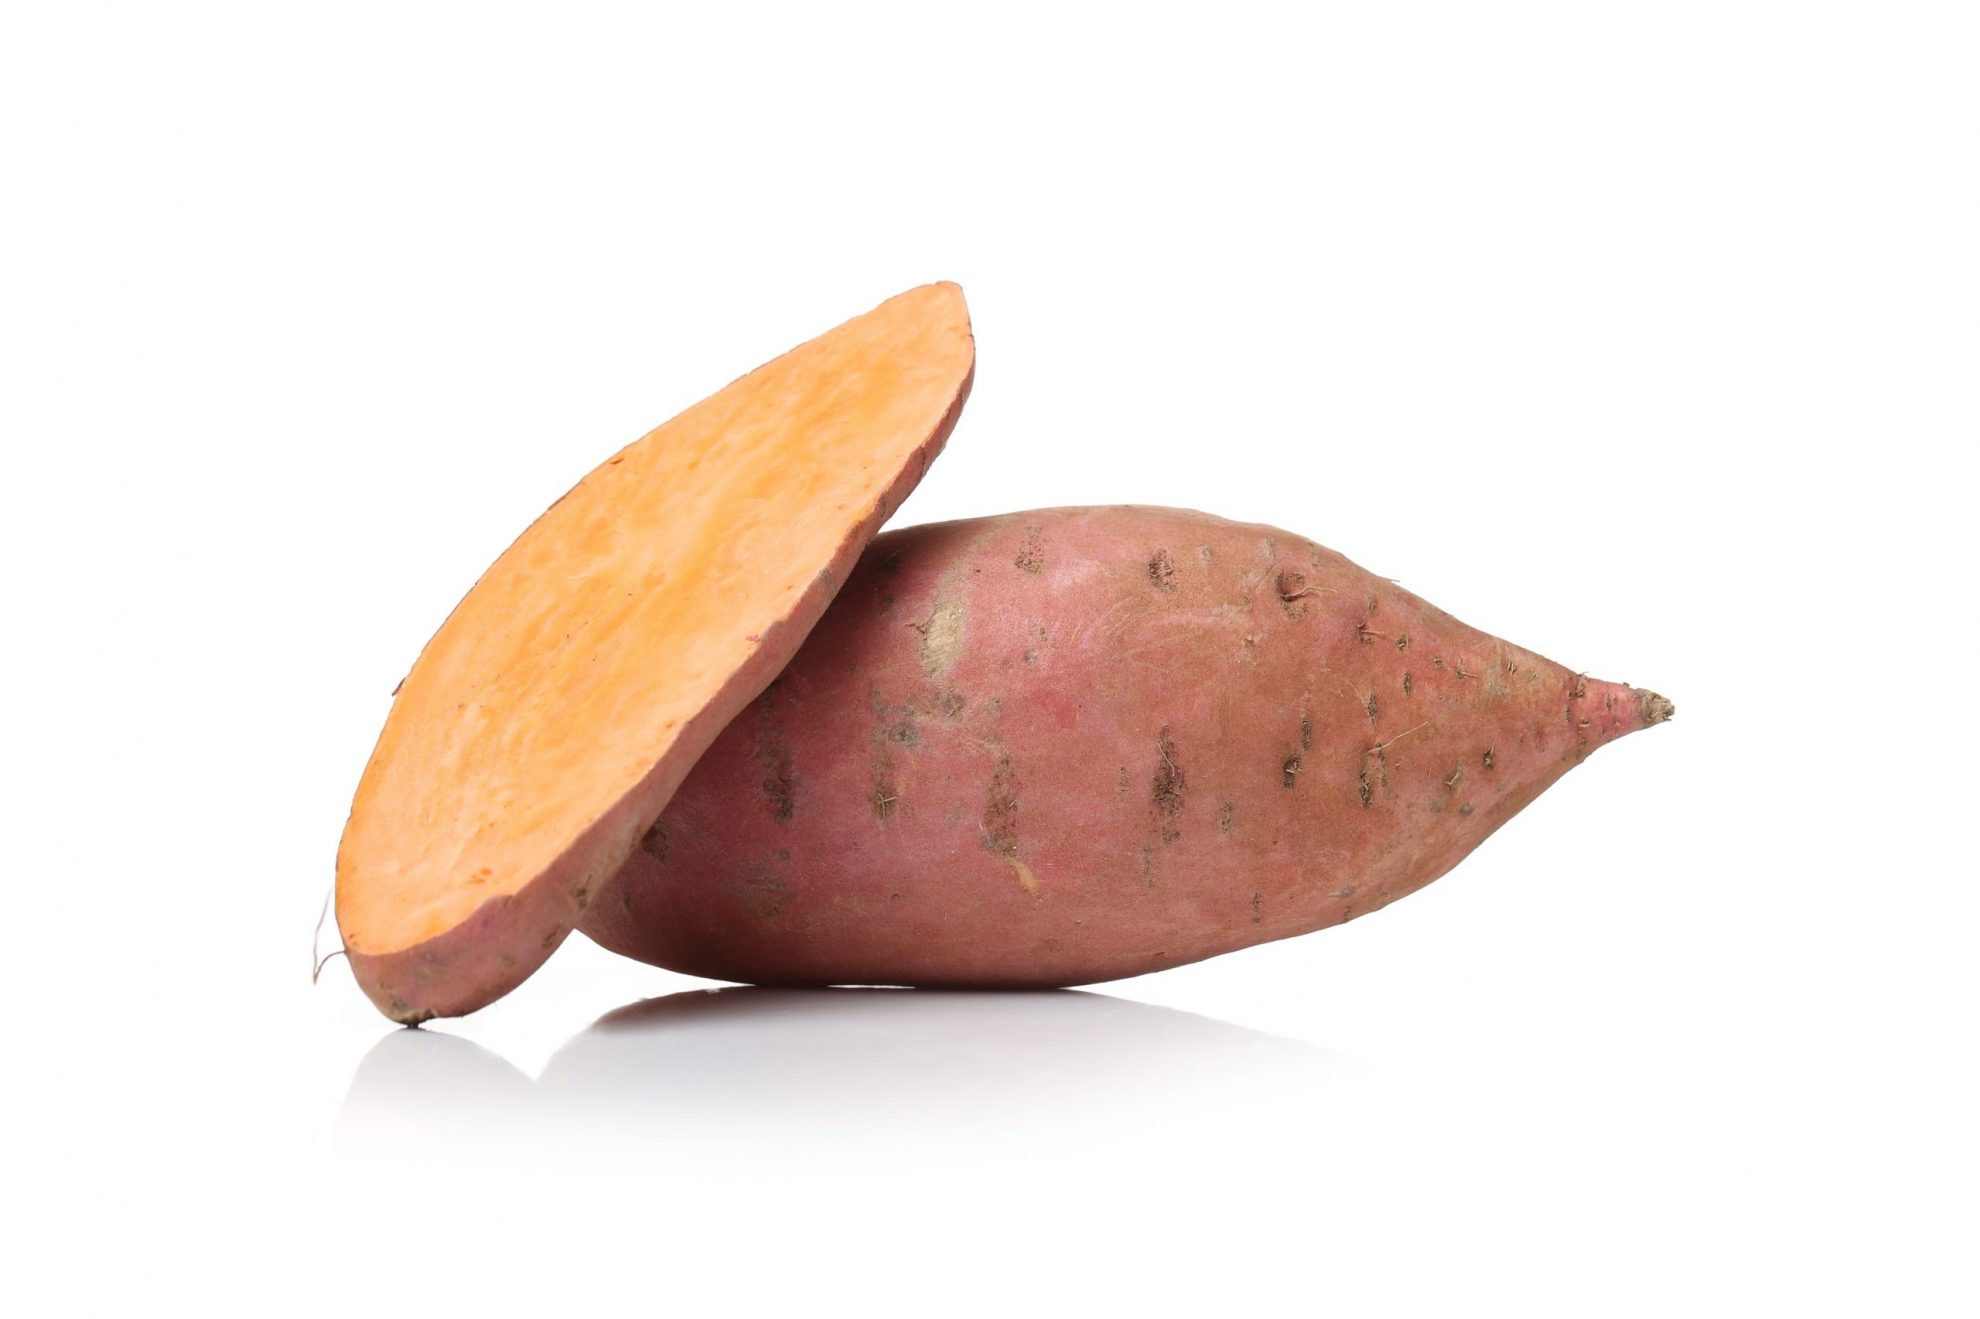 The Amazing Benefits of Sweet Potatoes — Nutrition Facts from Experts